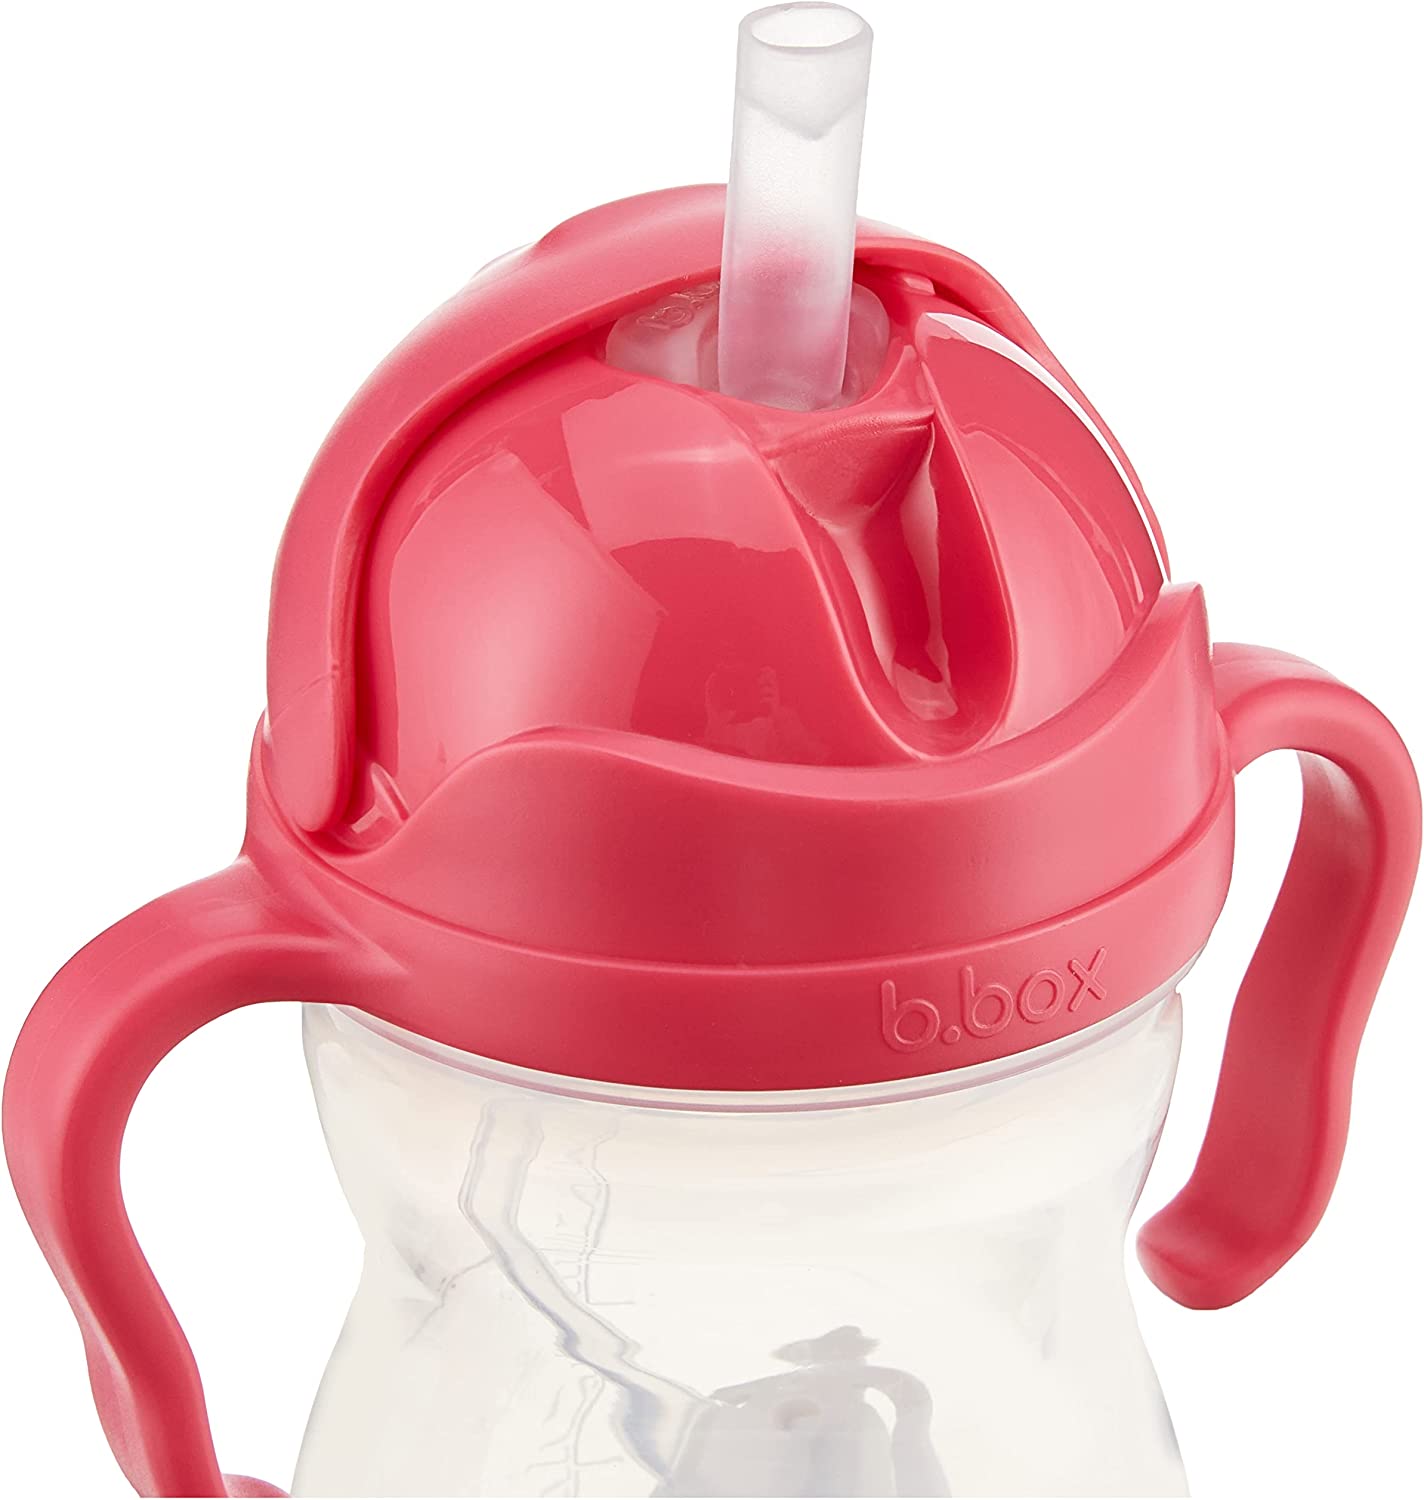 b.box Sippy Cup with Innovative Continuous Flow Weighted Straw Cup, Baby Straw Cup, Drink from any Angle, Easy-Grip Handles, 8oz, 6 months+.